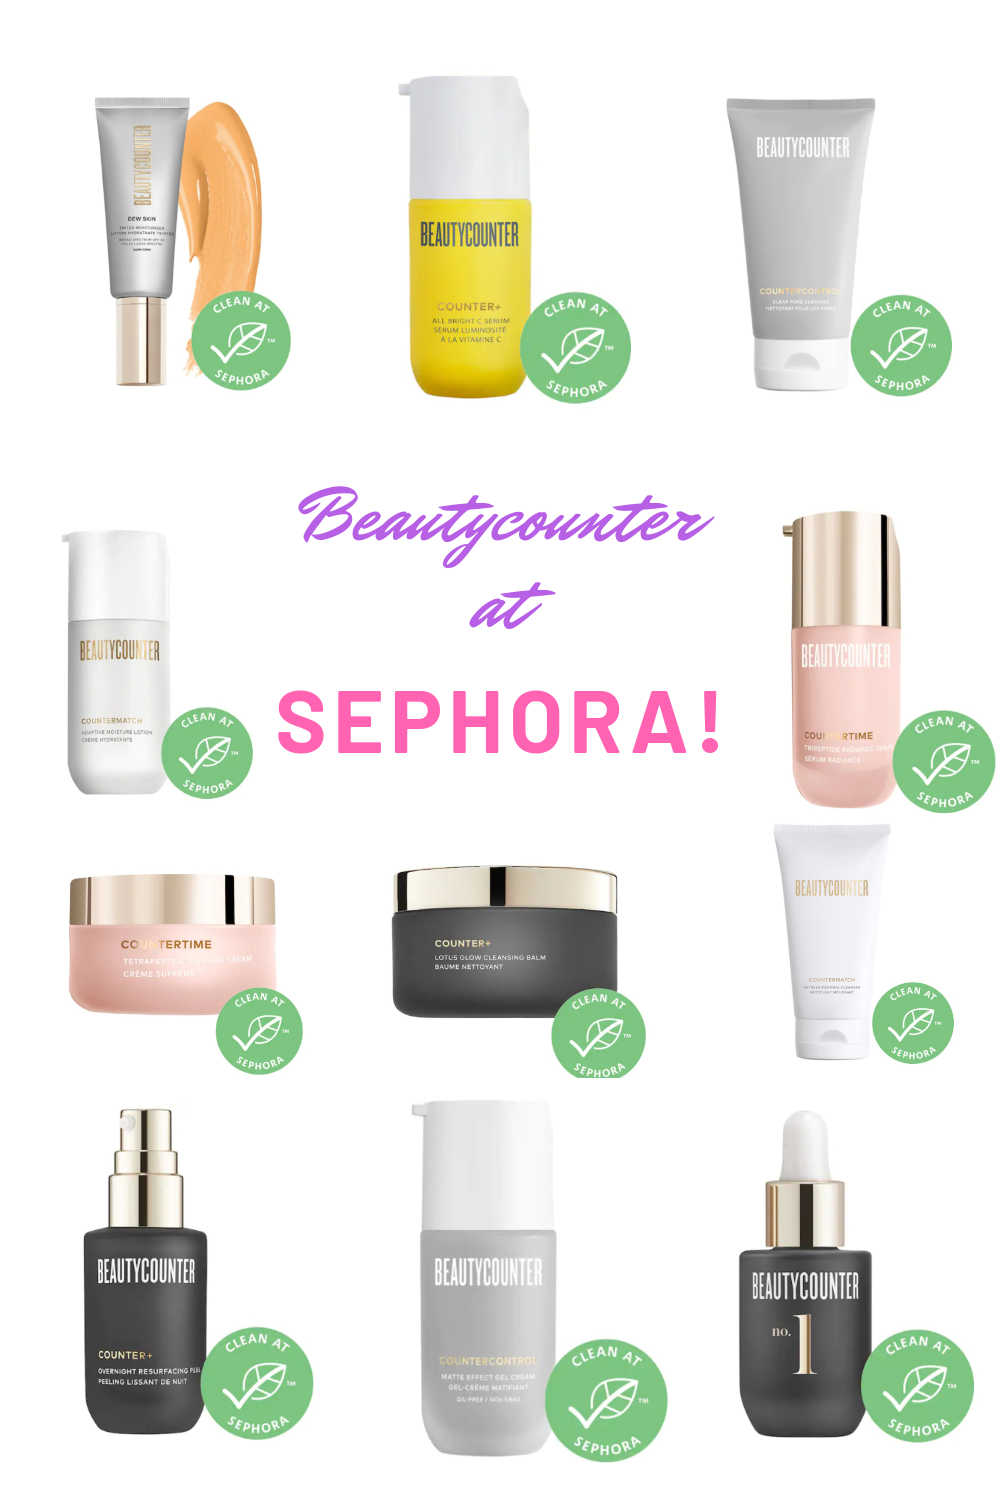 Top Orlando Blogger Emily of Fabulously Overdressed shares Beautycounter at Sephora Products